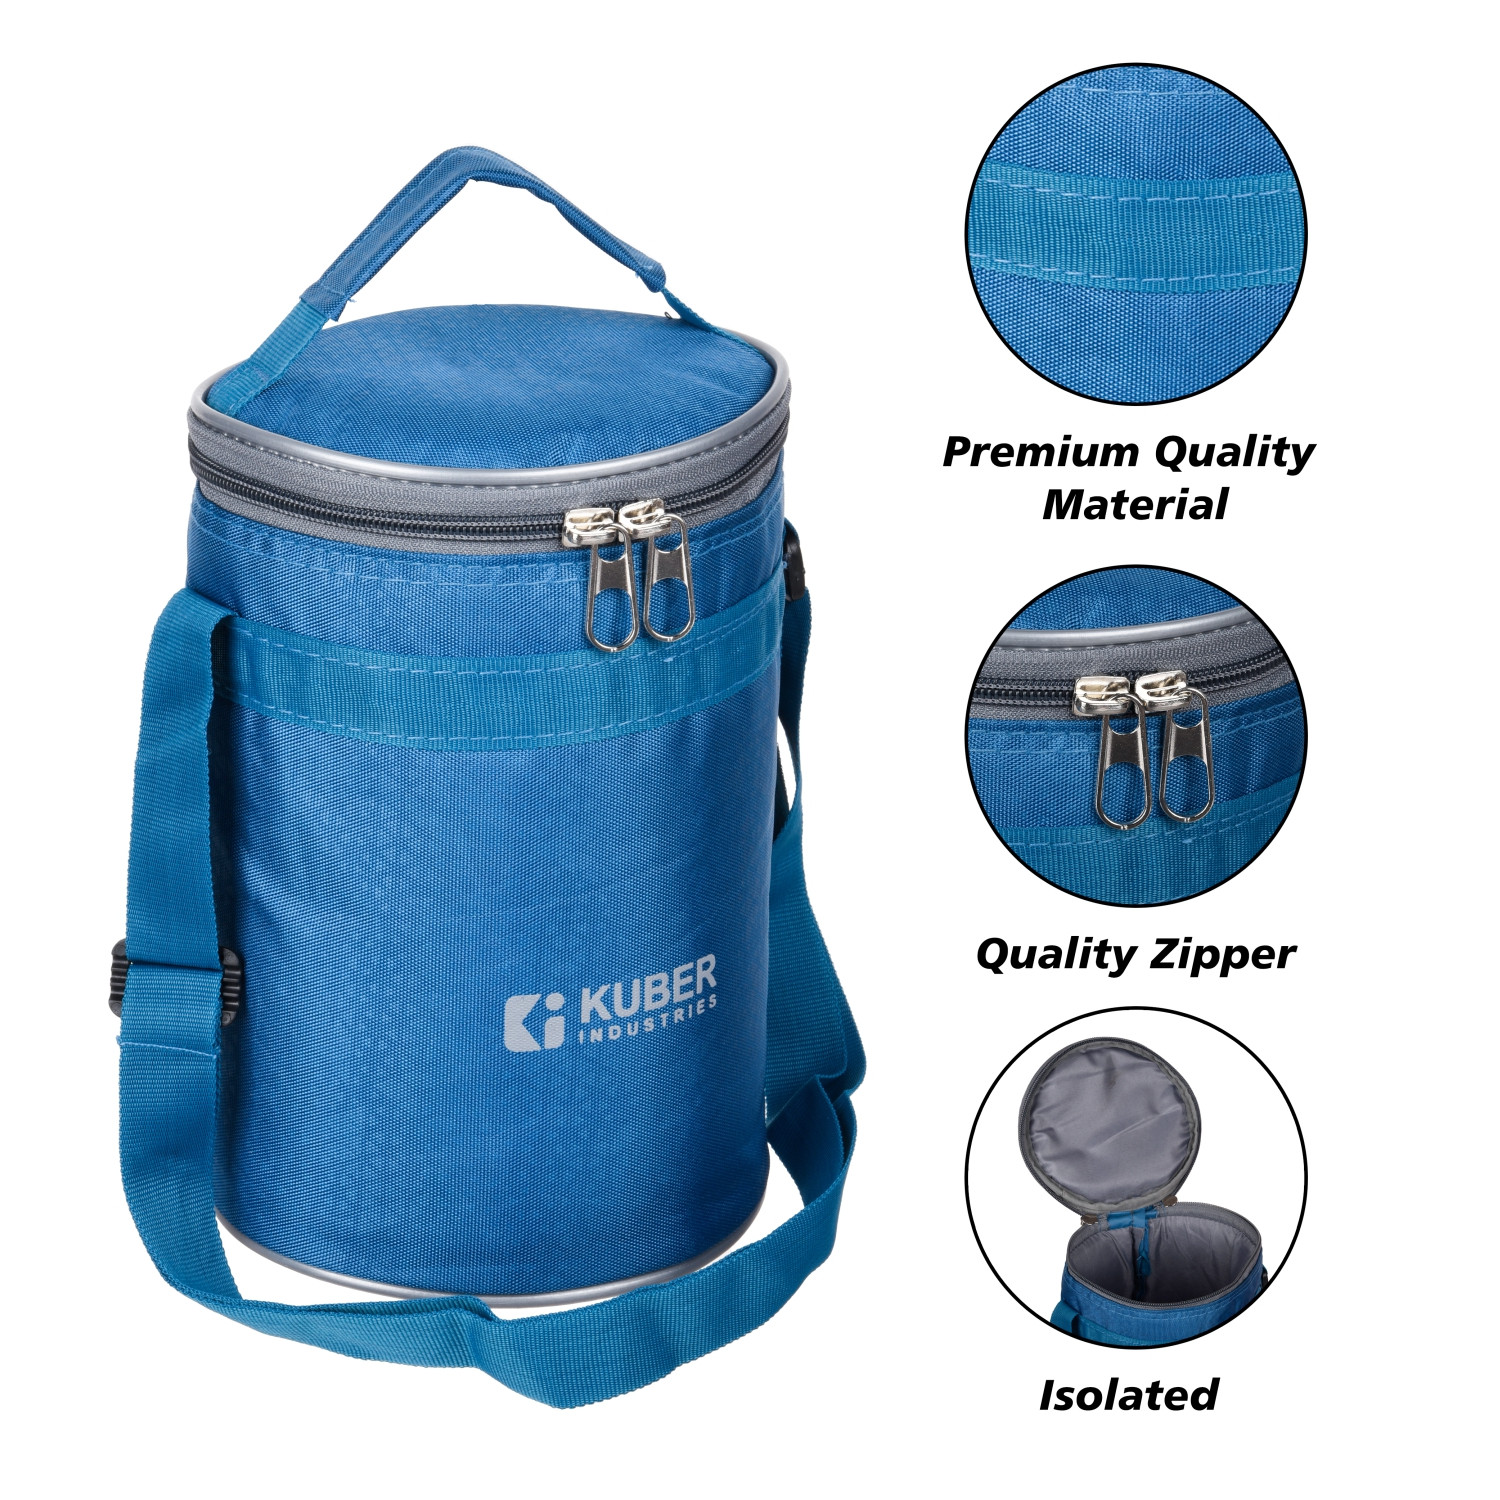 Kuber Industries Lunch Bag | Lunch Bag for Office | Lunch Bag for College | Reusable Lunch Bag | Lunch Bag for Adults | Lunch Bag with Handle | Insulated Lunch Bag | Sky Blue